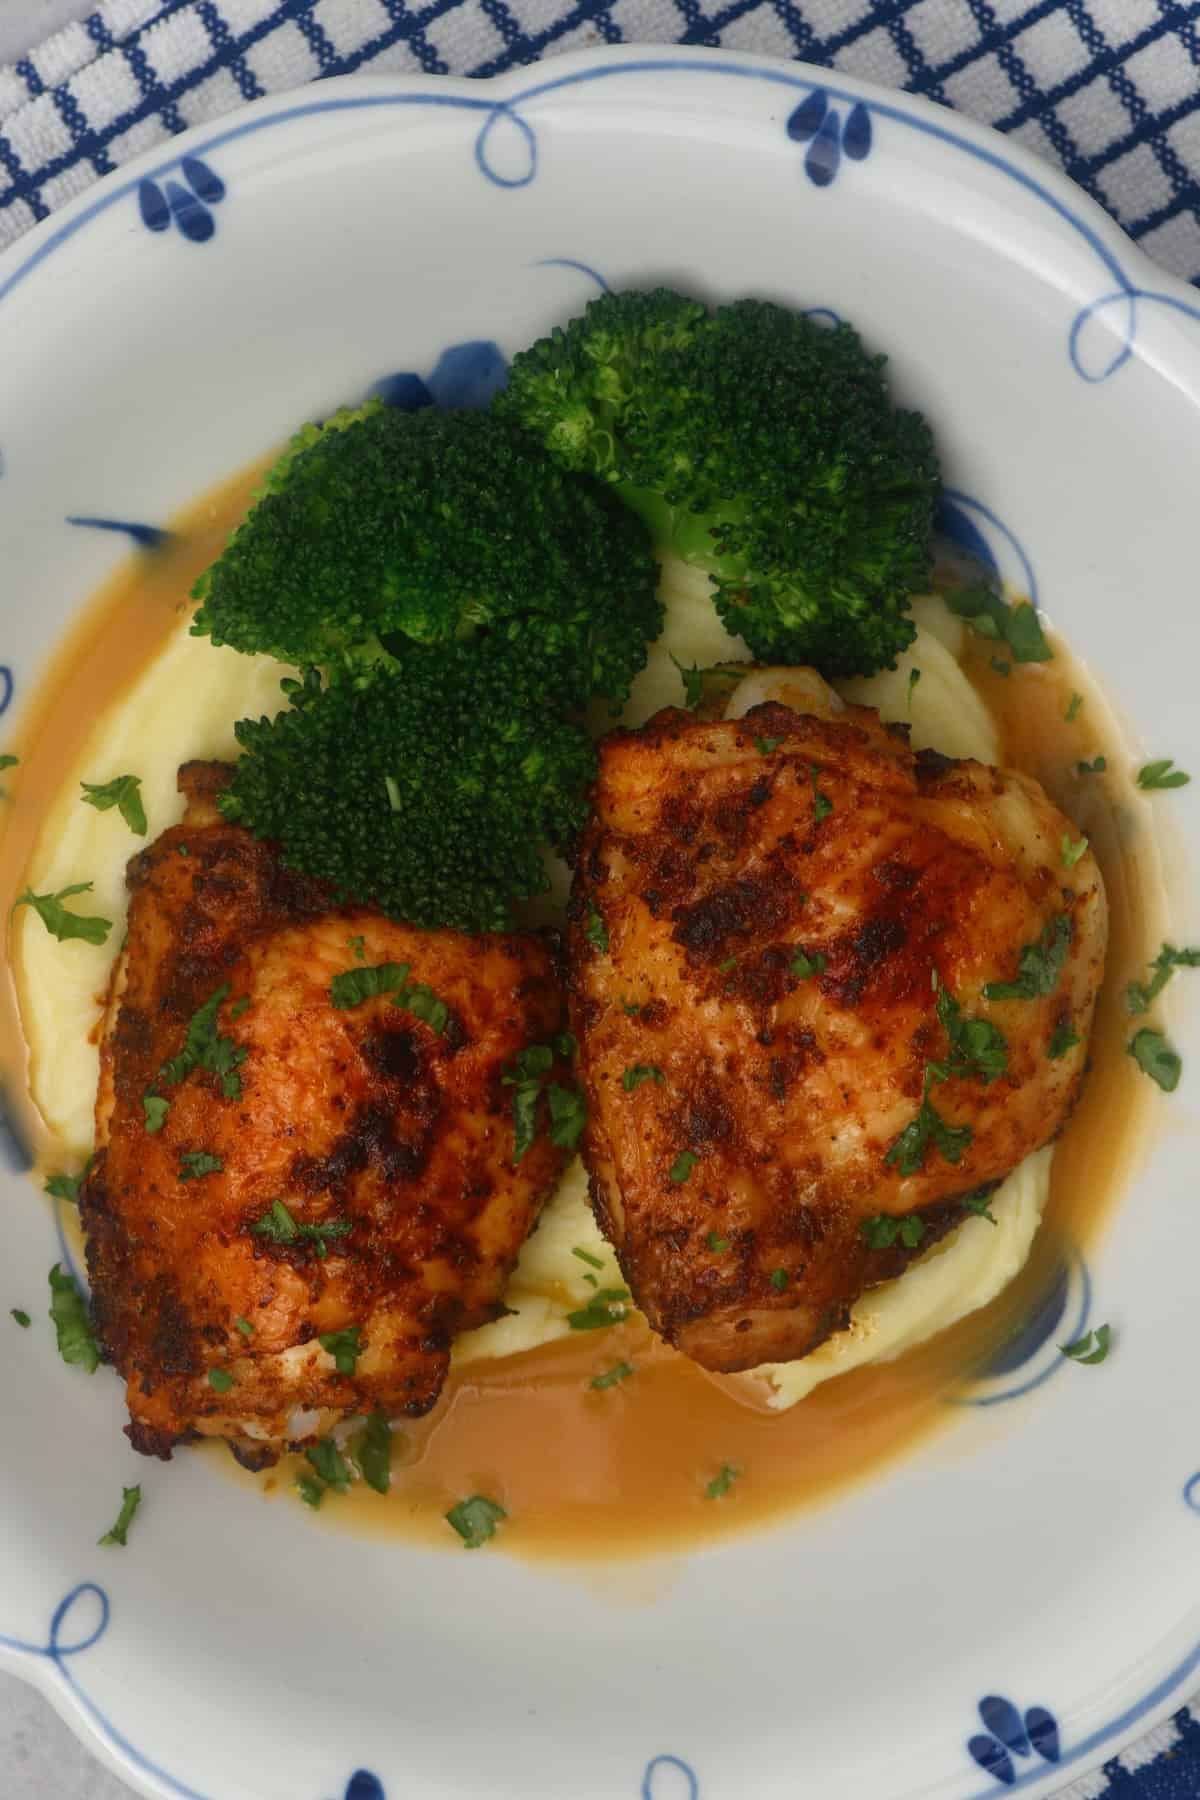 Chicken thighs with broccoli and mashed potatoes